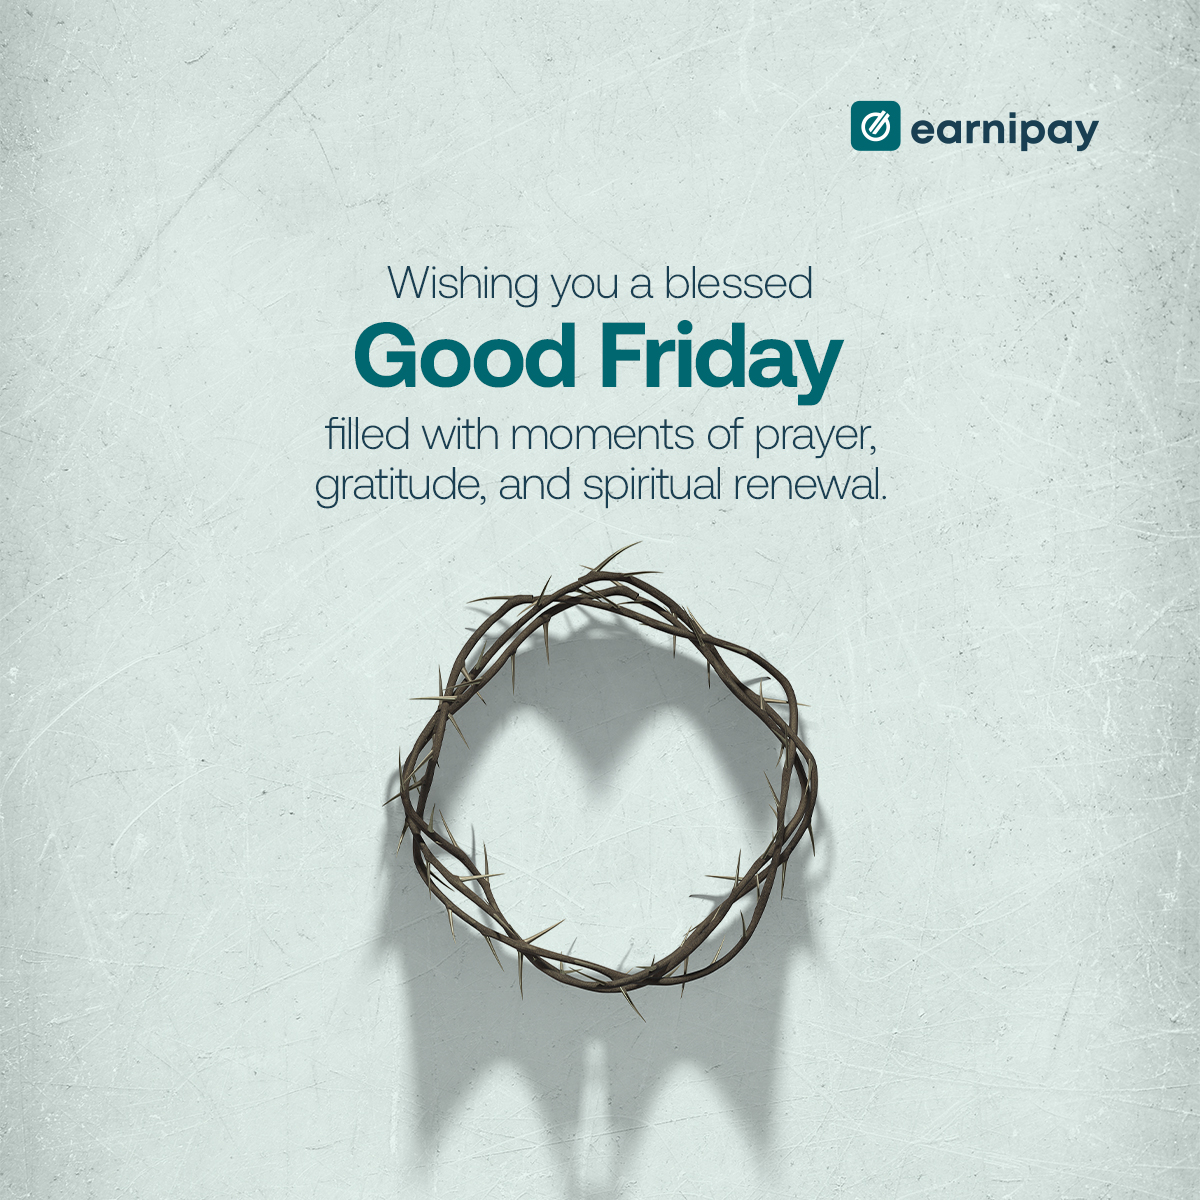 May this day of remembrance bring you peace and blessings. #GoodFriday #earnipay